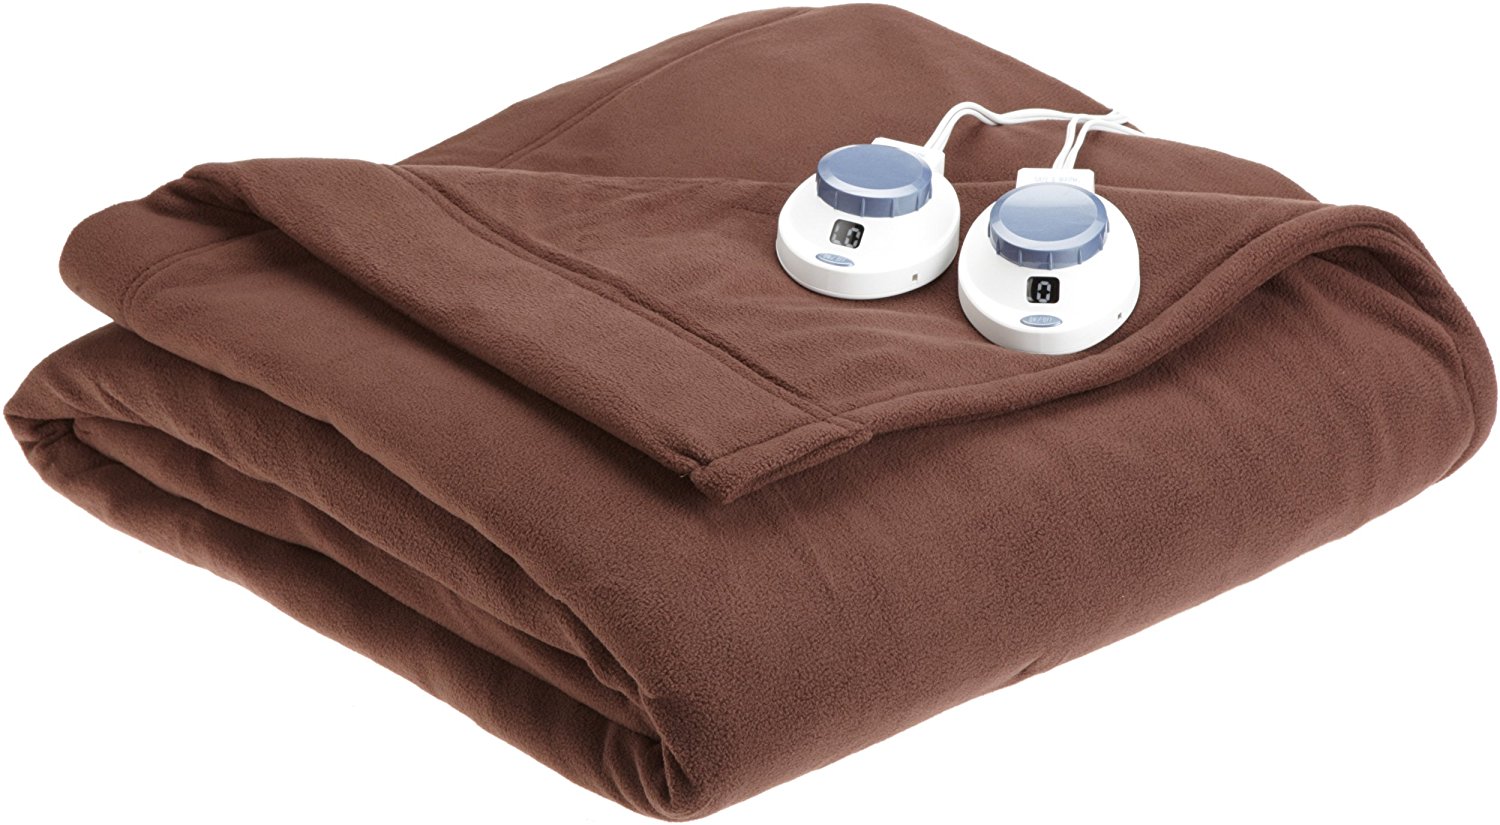 Soft Heat Luxury Micro-Fleece Electric Blanket | 25+ Gifts for Her 